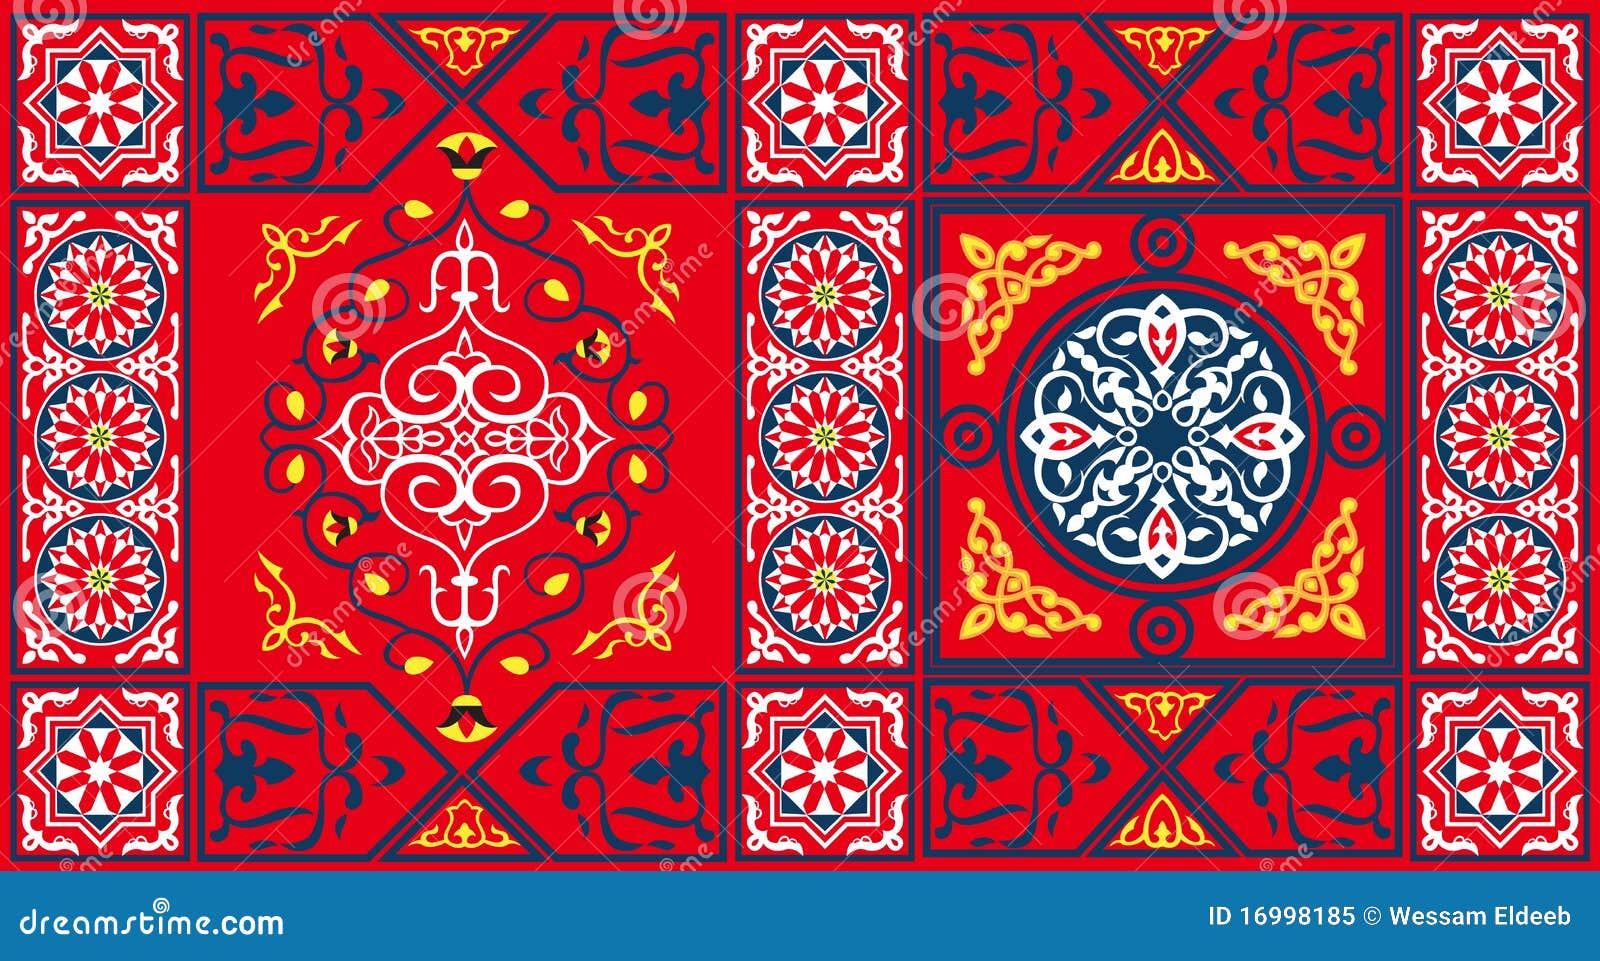 egyptian tent fabric pattern 2-red